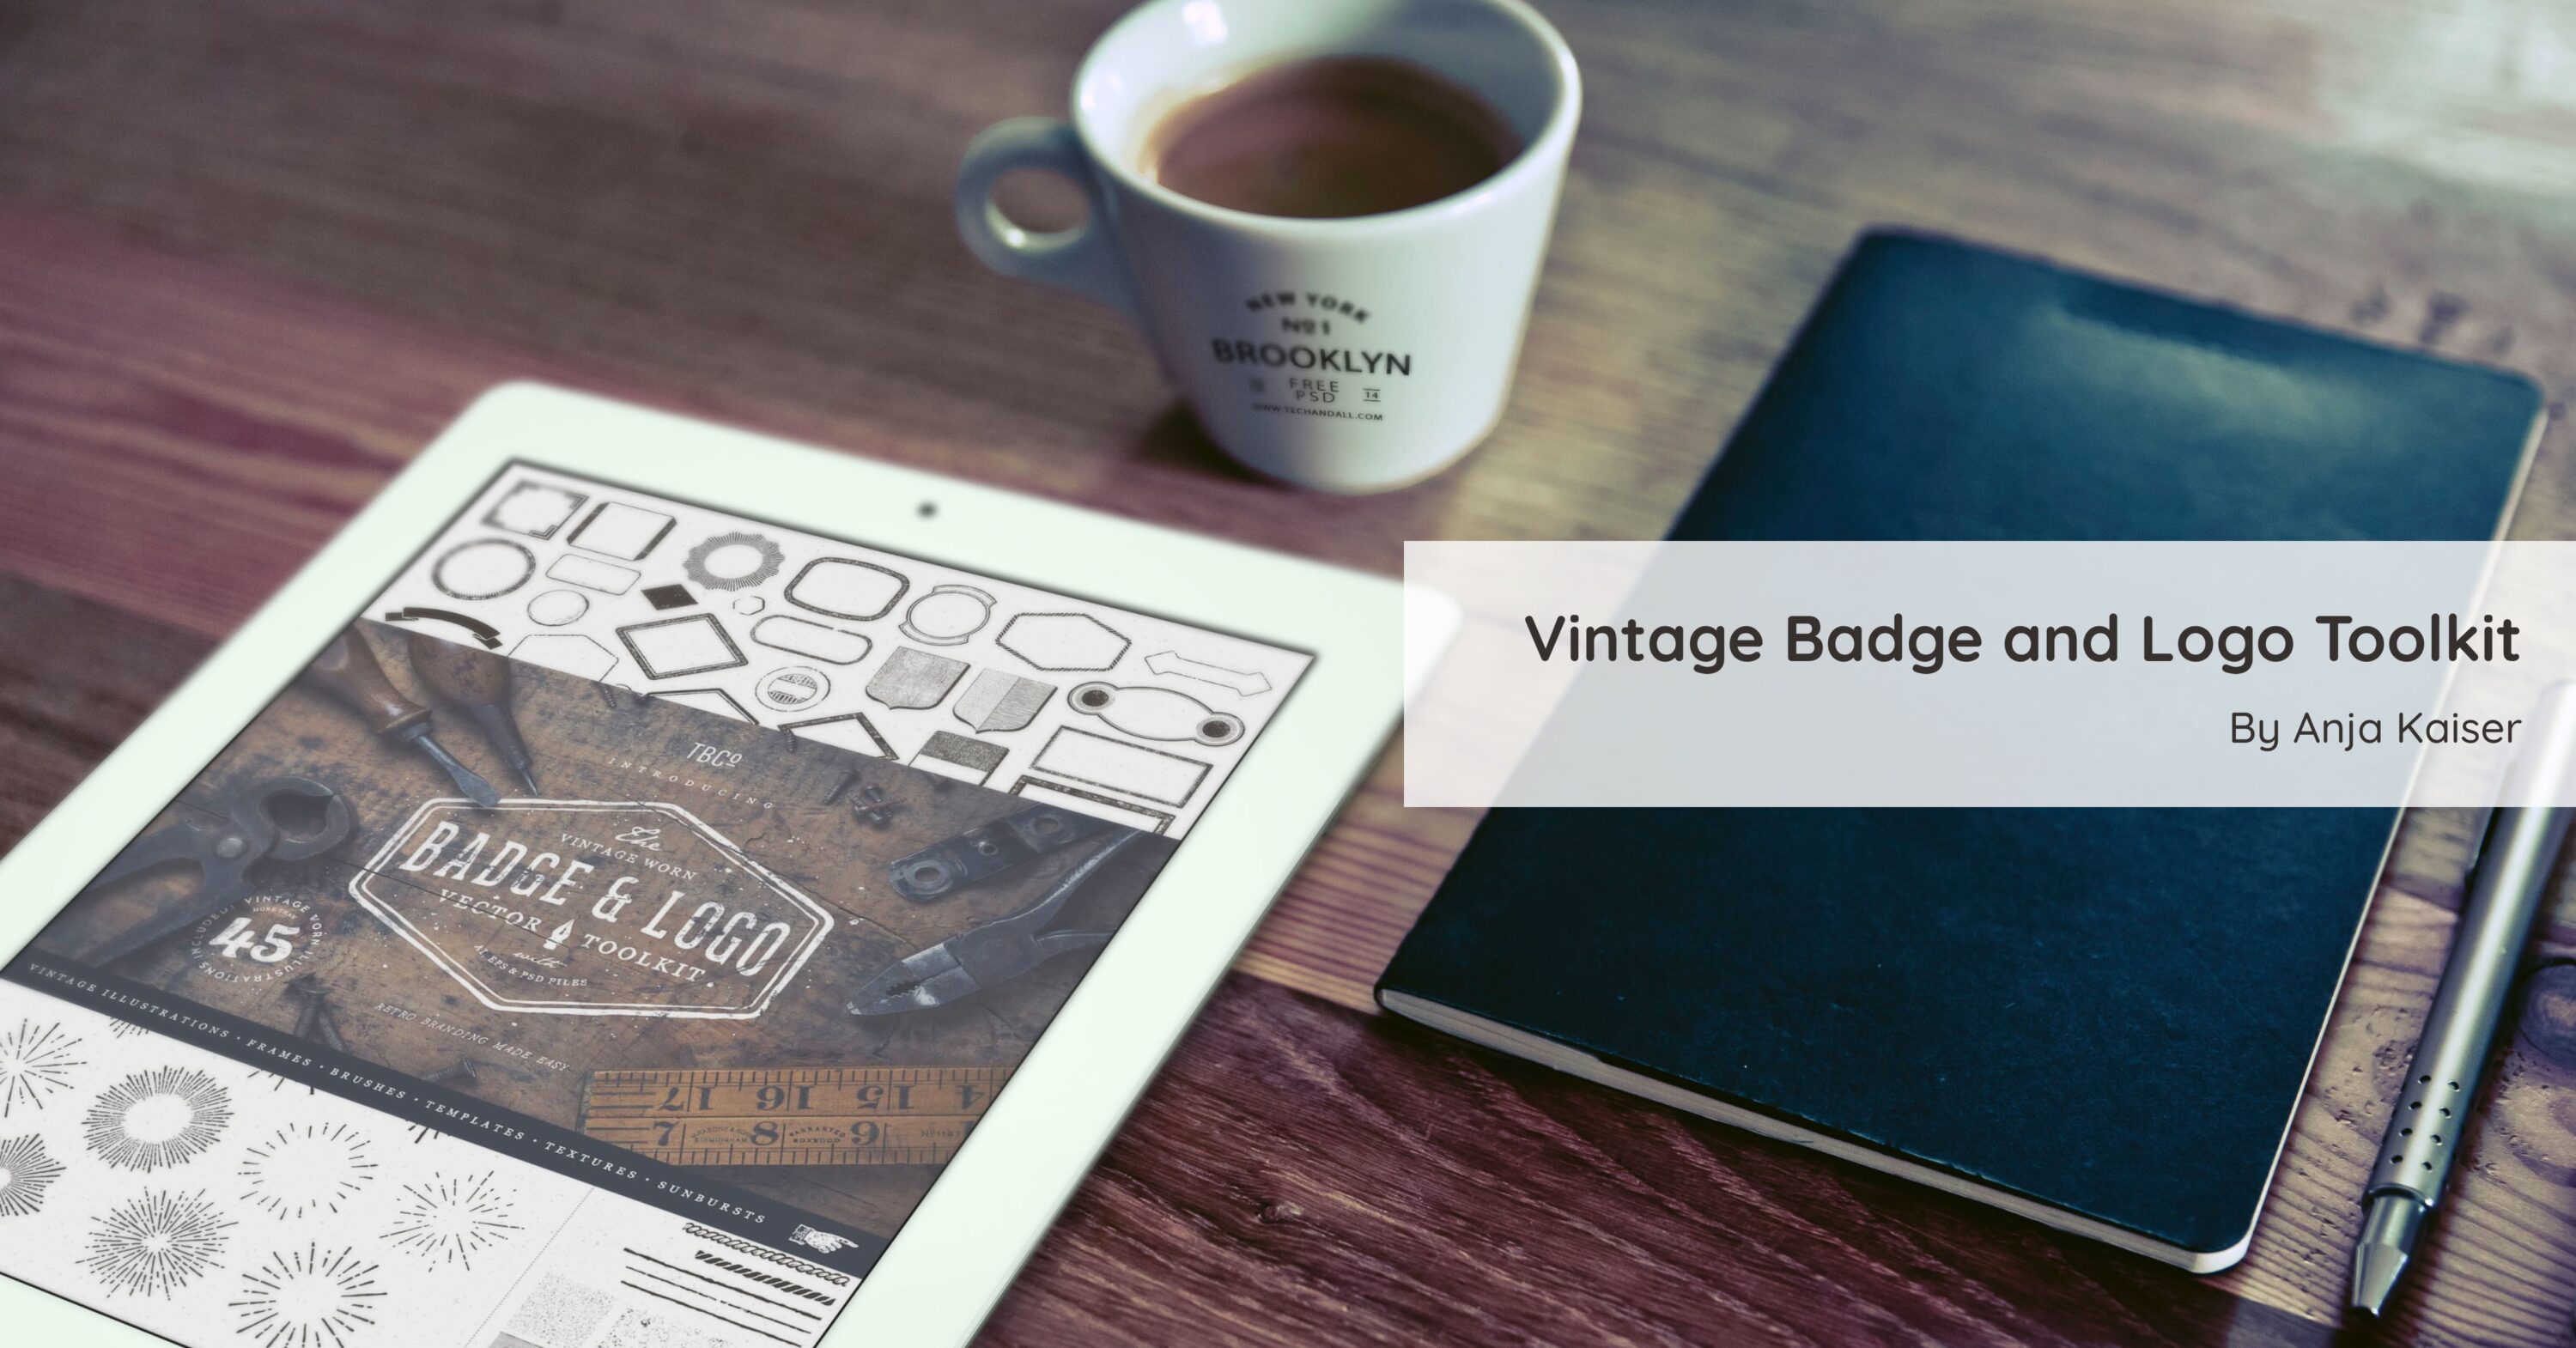 Vintage Badge and Logo Toolkit - coffee and tablet.